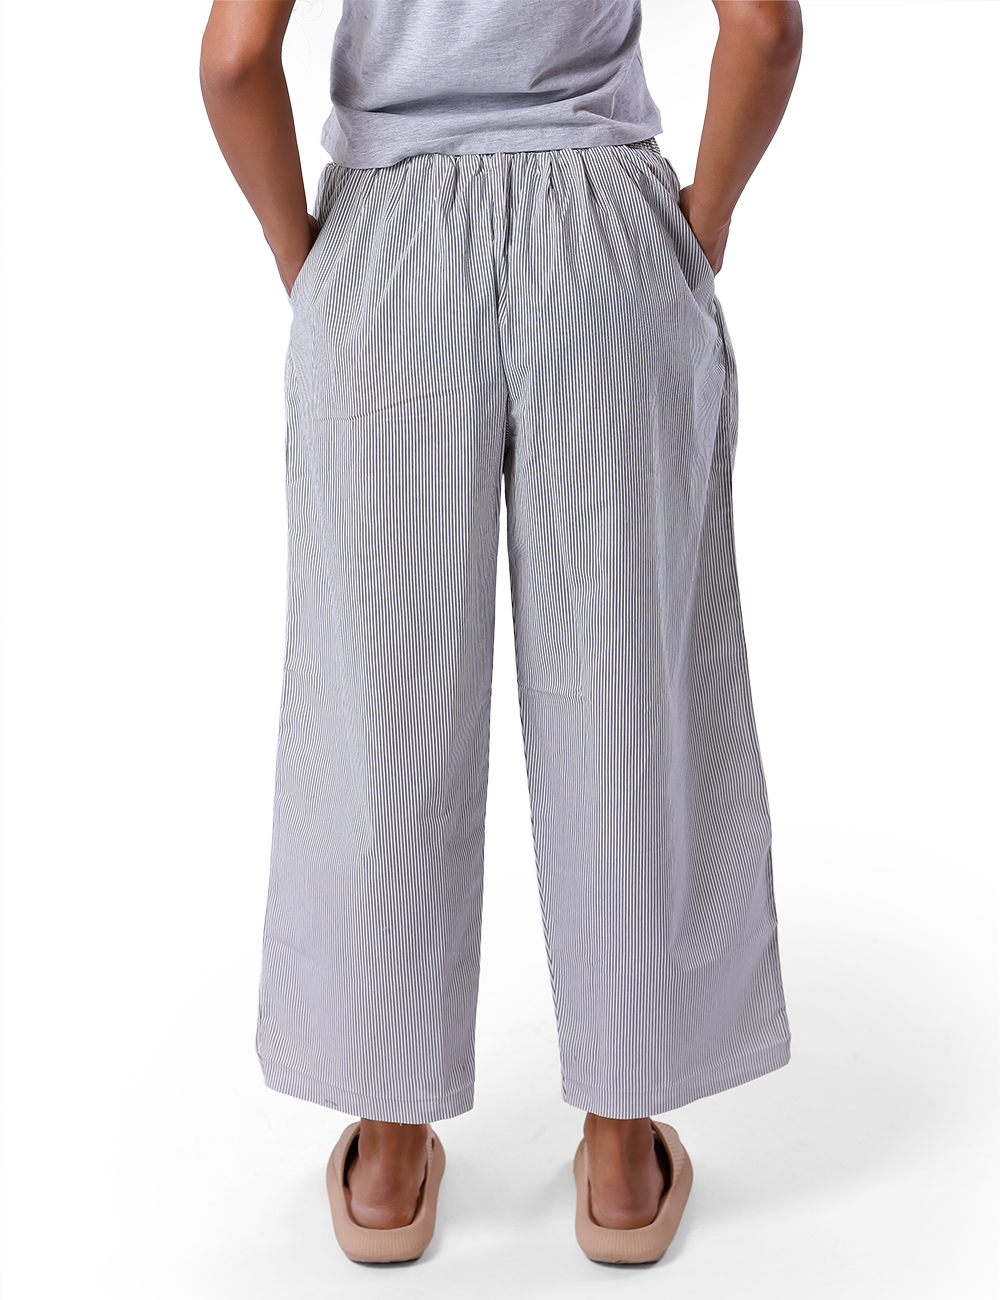 Ella Pants - A comfy pair with a wide-leg silhouette.